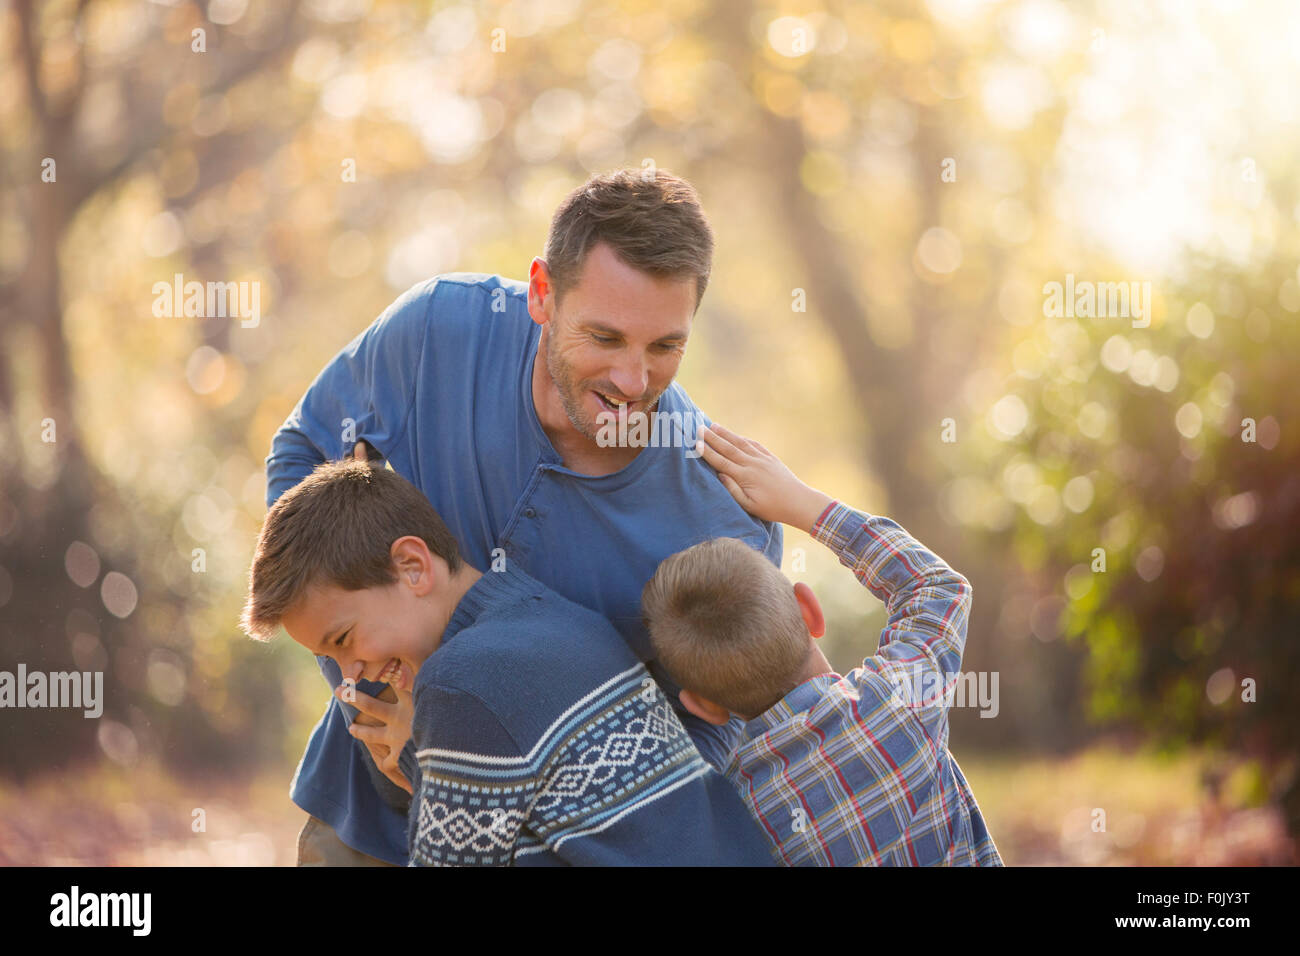 Playful father and sons rough housing outdoors Stock Photo